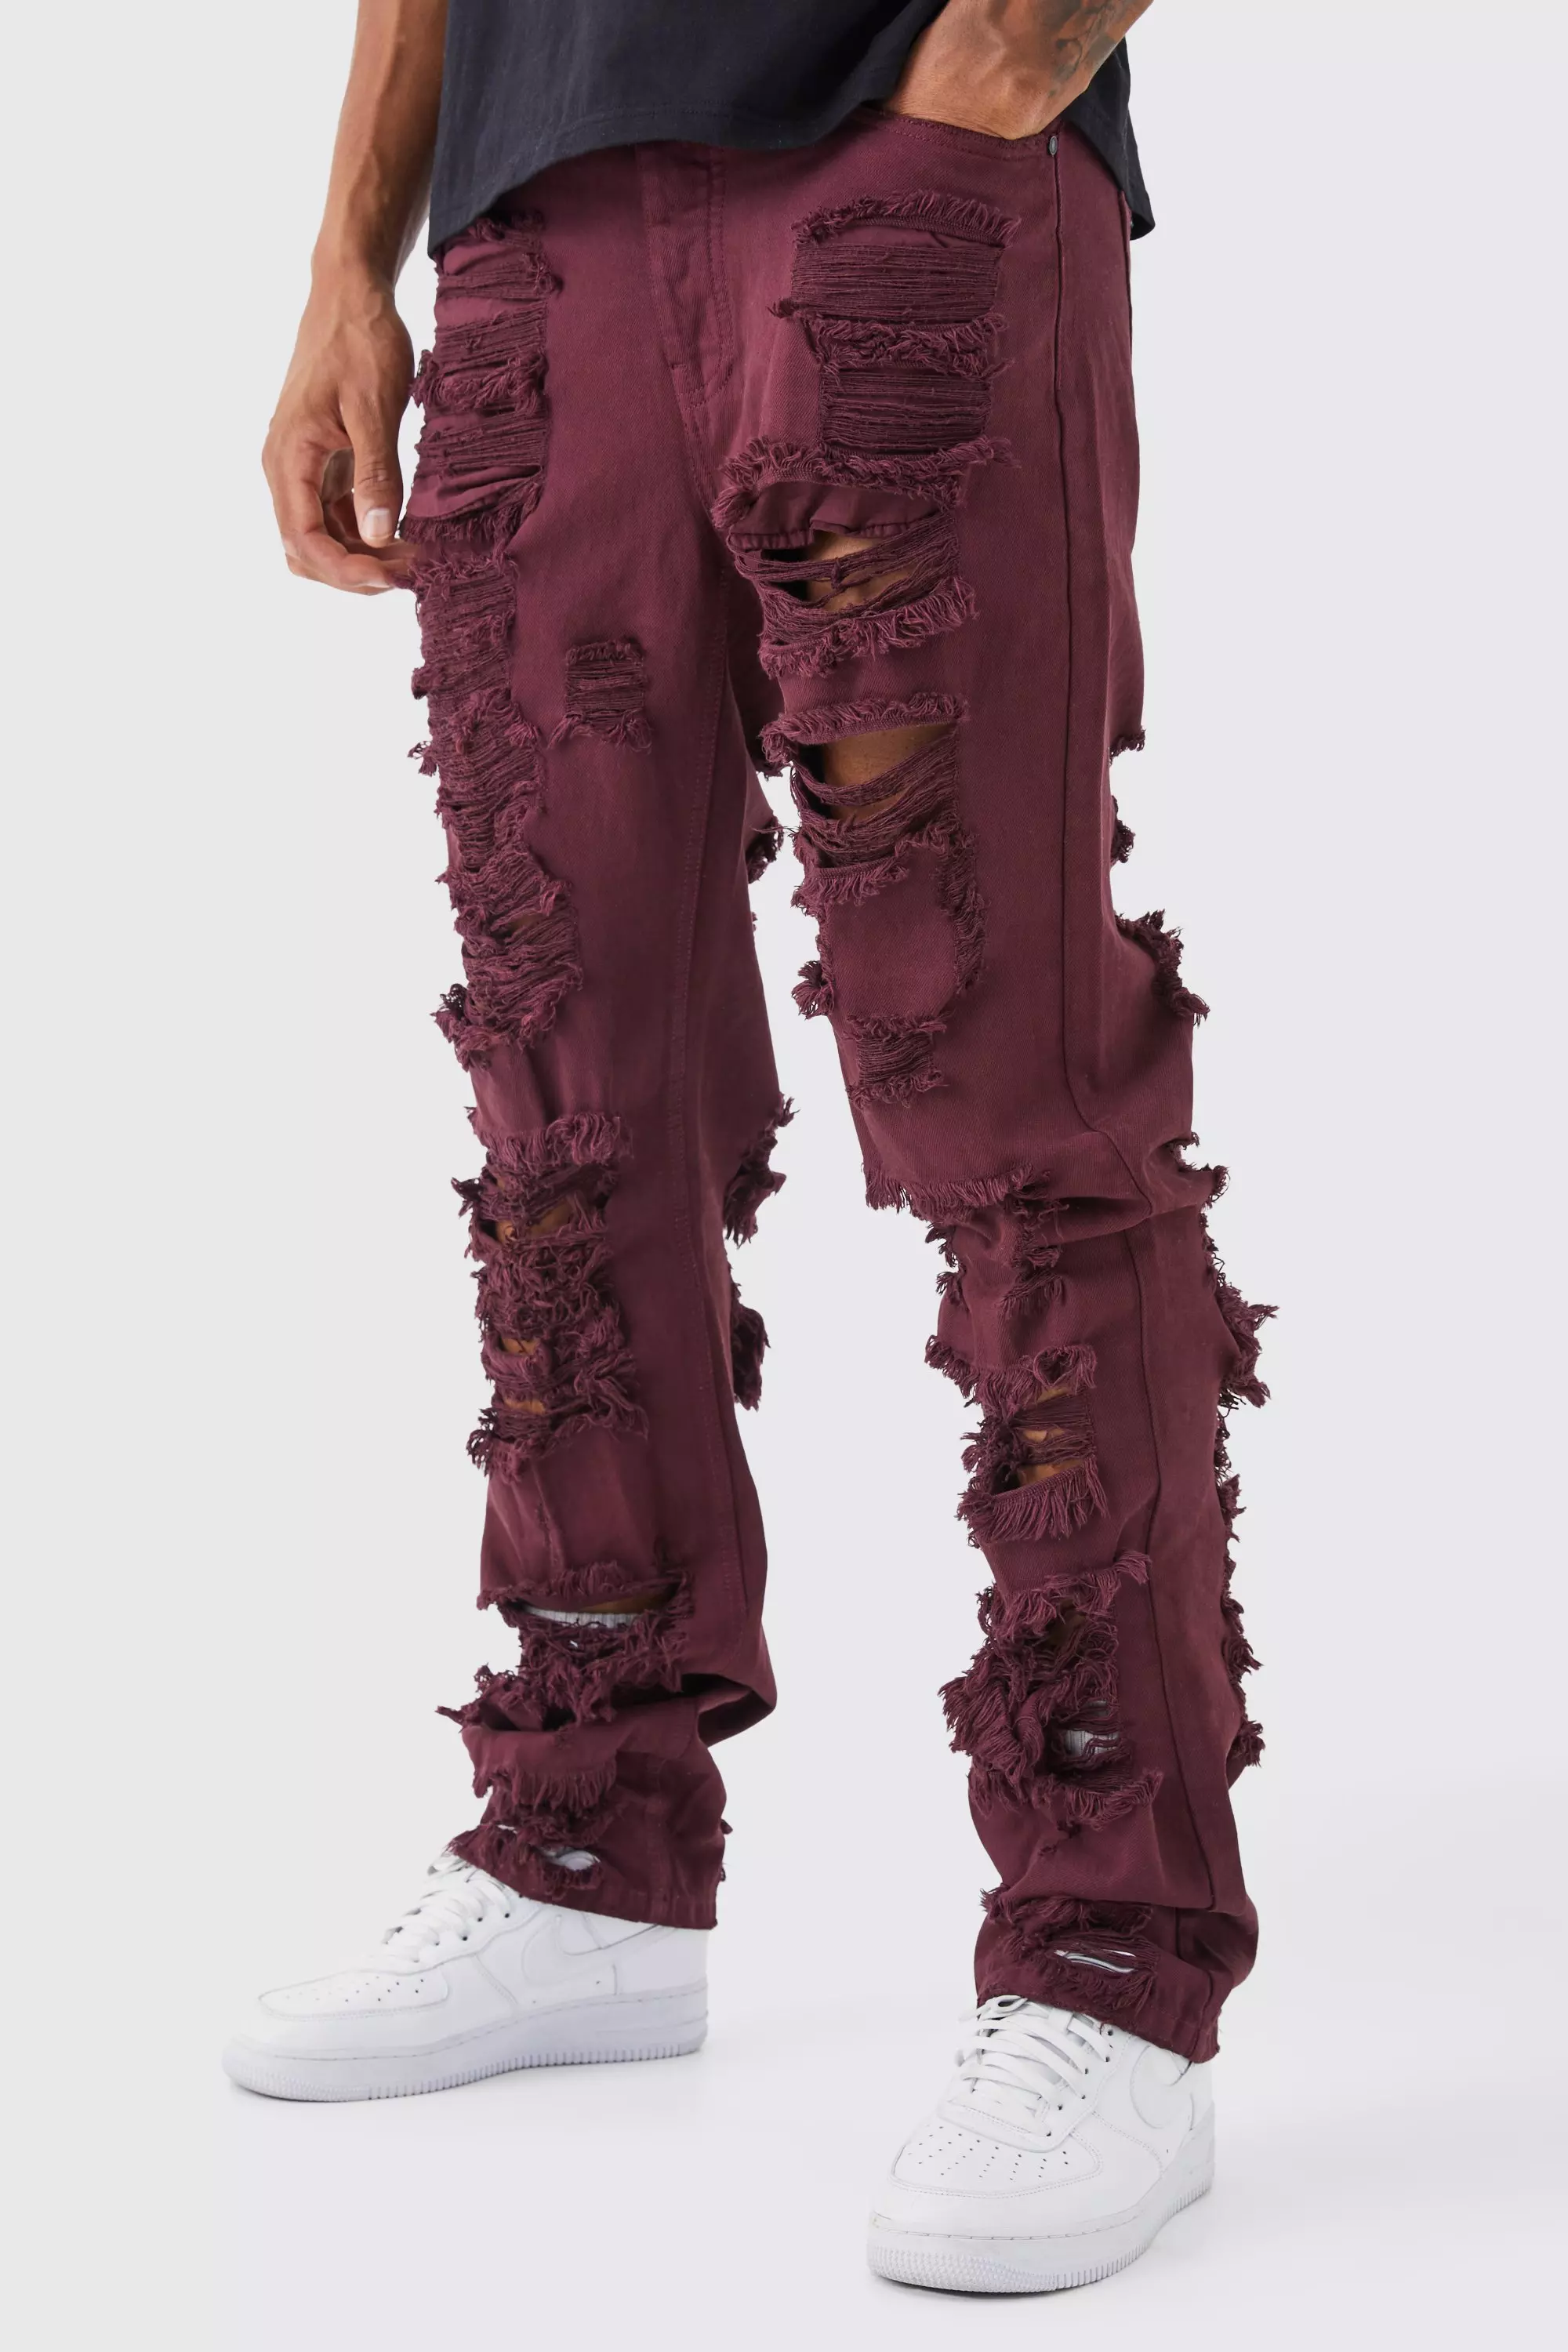 Burgundy Red Tall Relaxed Rigid Extreme Ripped Jean